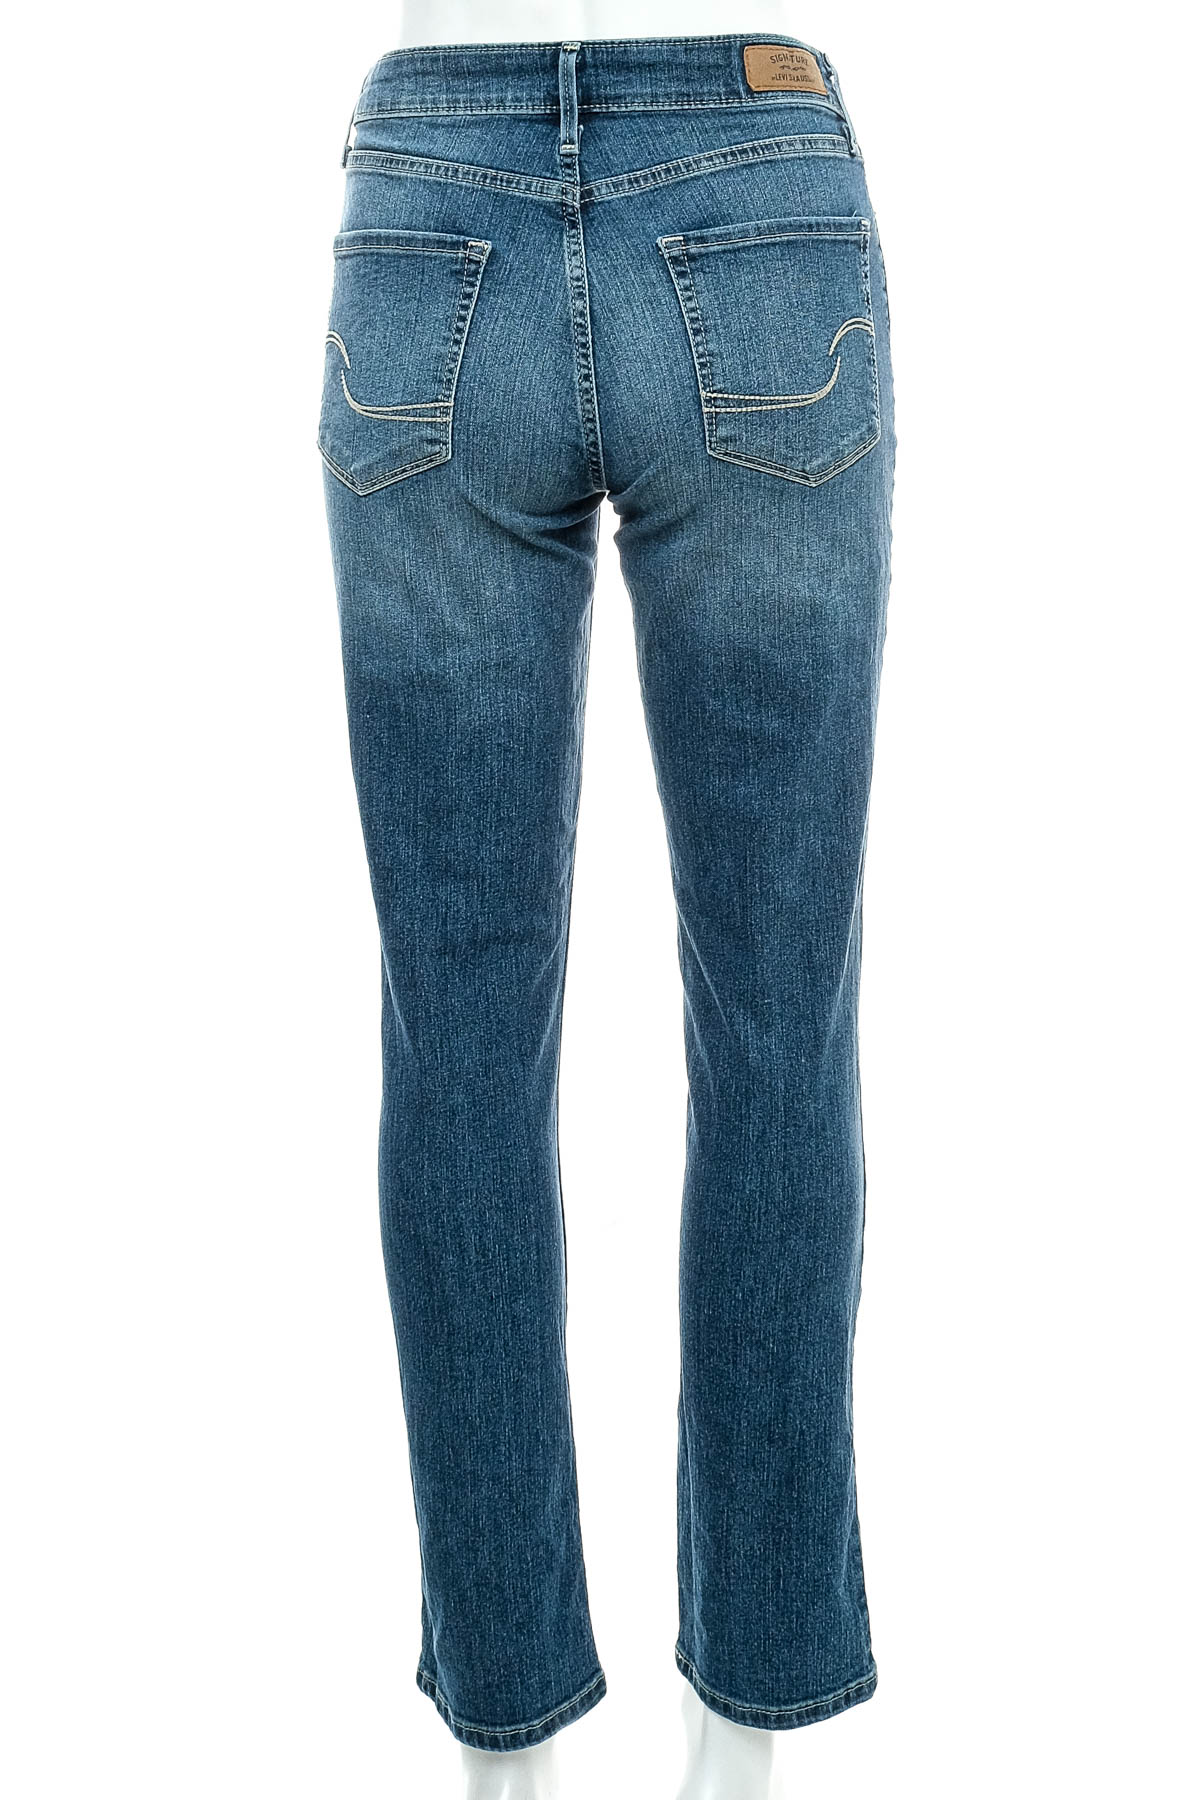 Women's jeans - SIGNATURE BY LEVI STRAUSS & CO. - 1